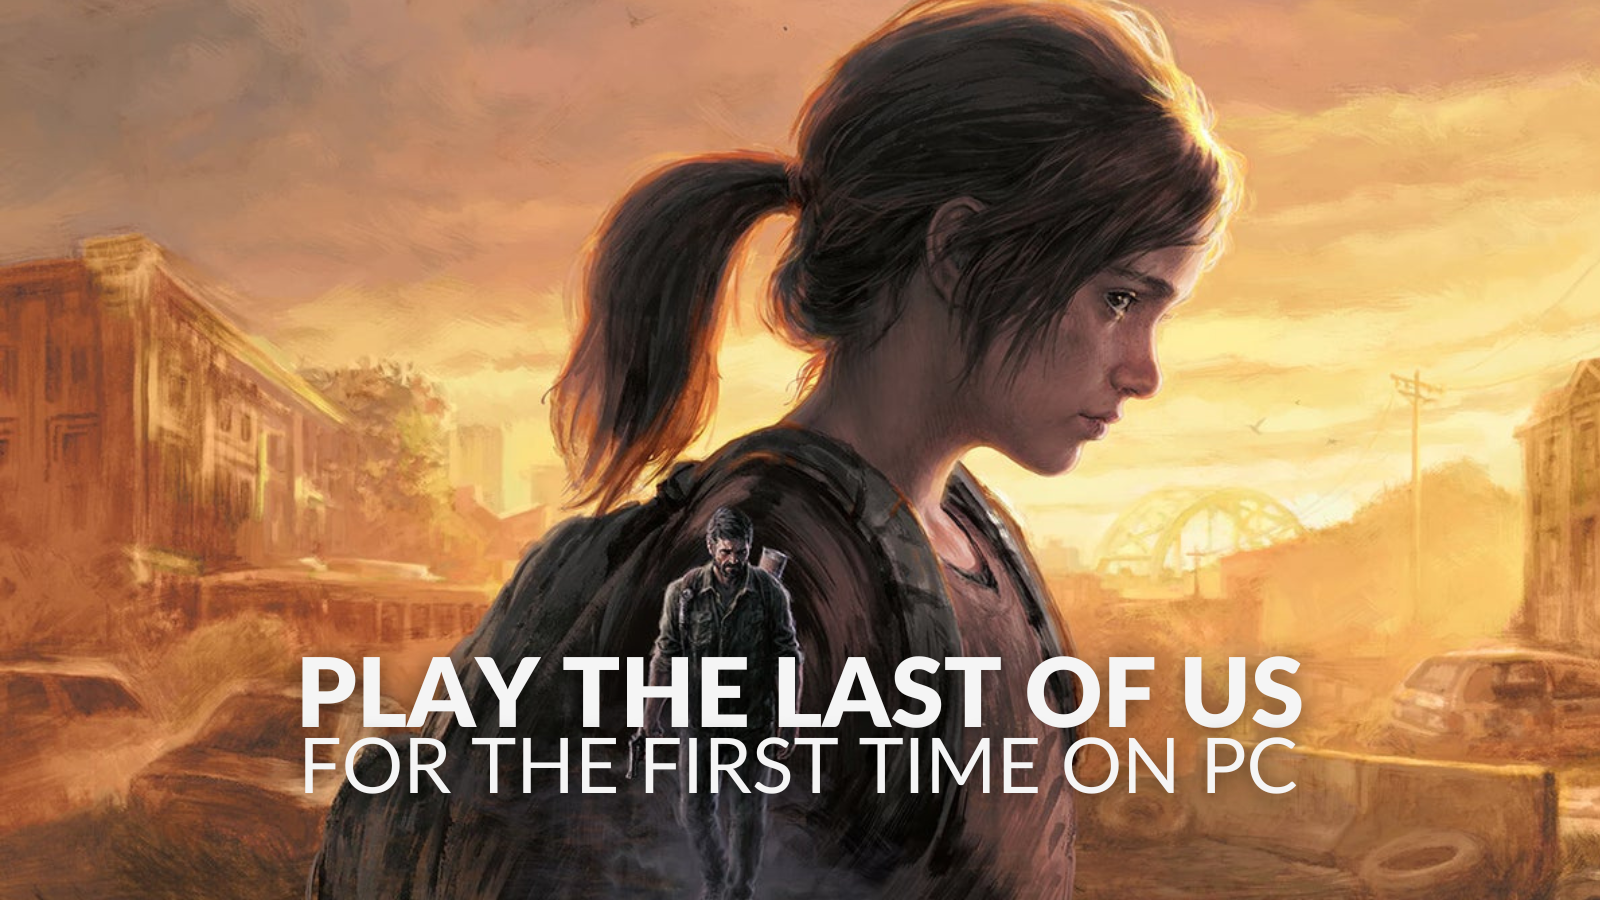 You can get The Last of Us Part I on PC for 20% off on Steam right now!  Relive this classic, or play through its iconic story for the first time by